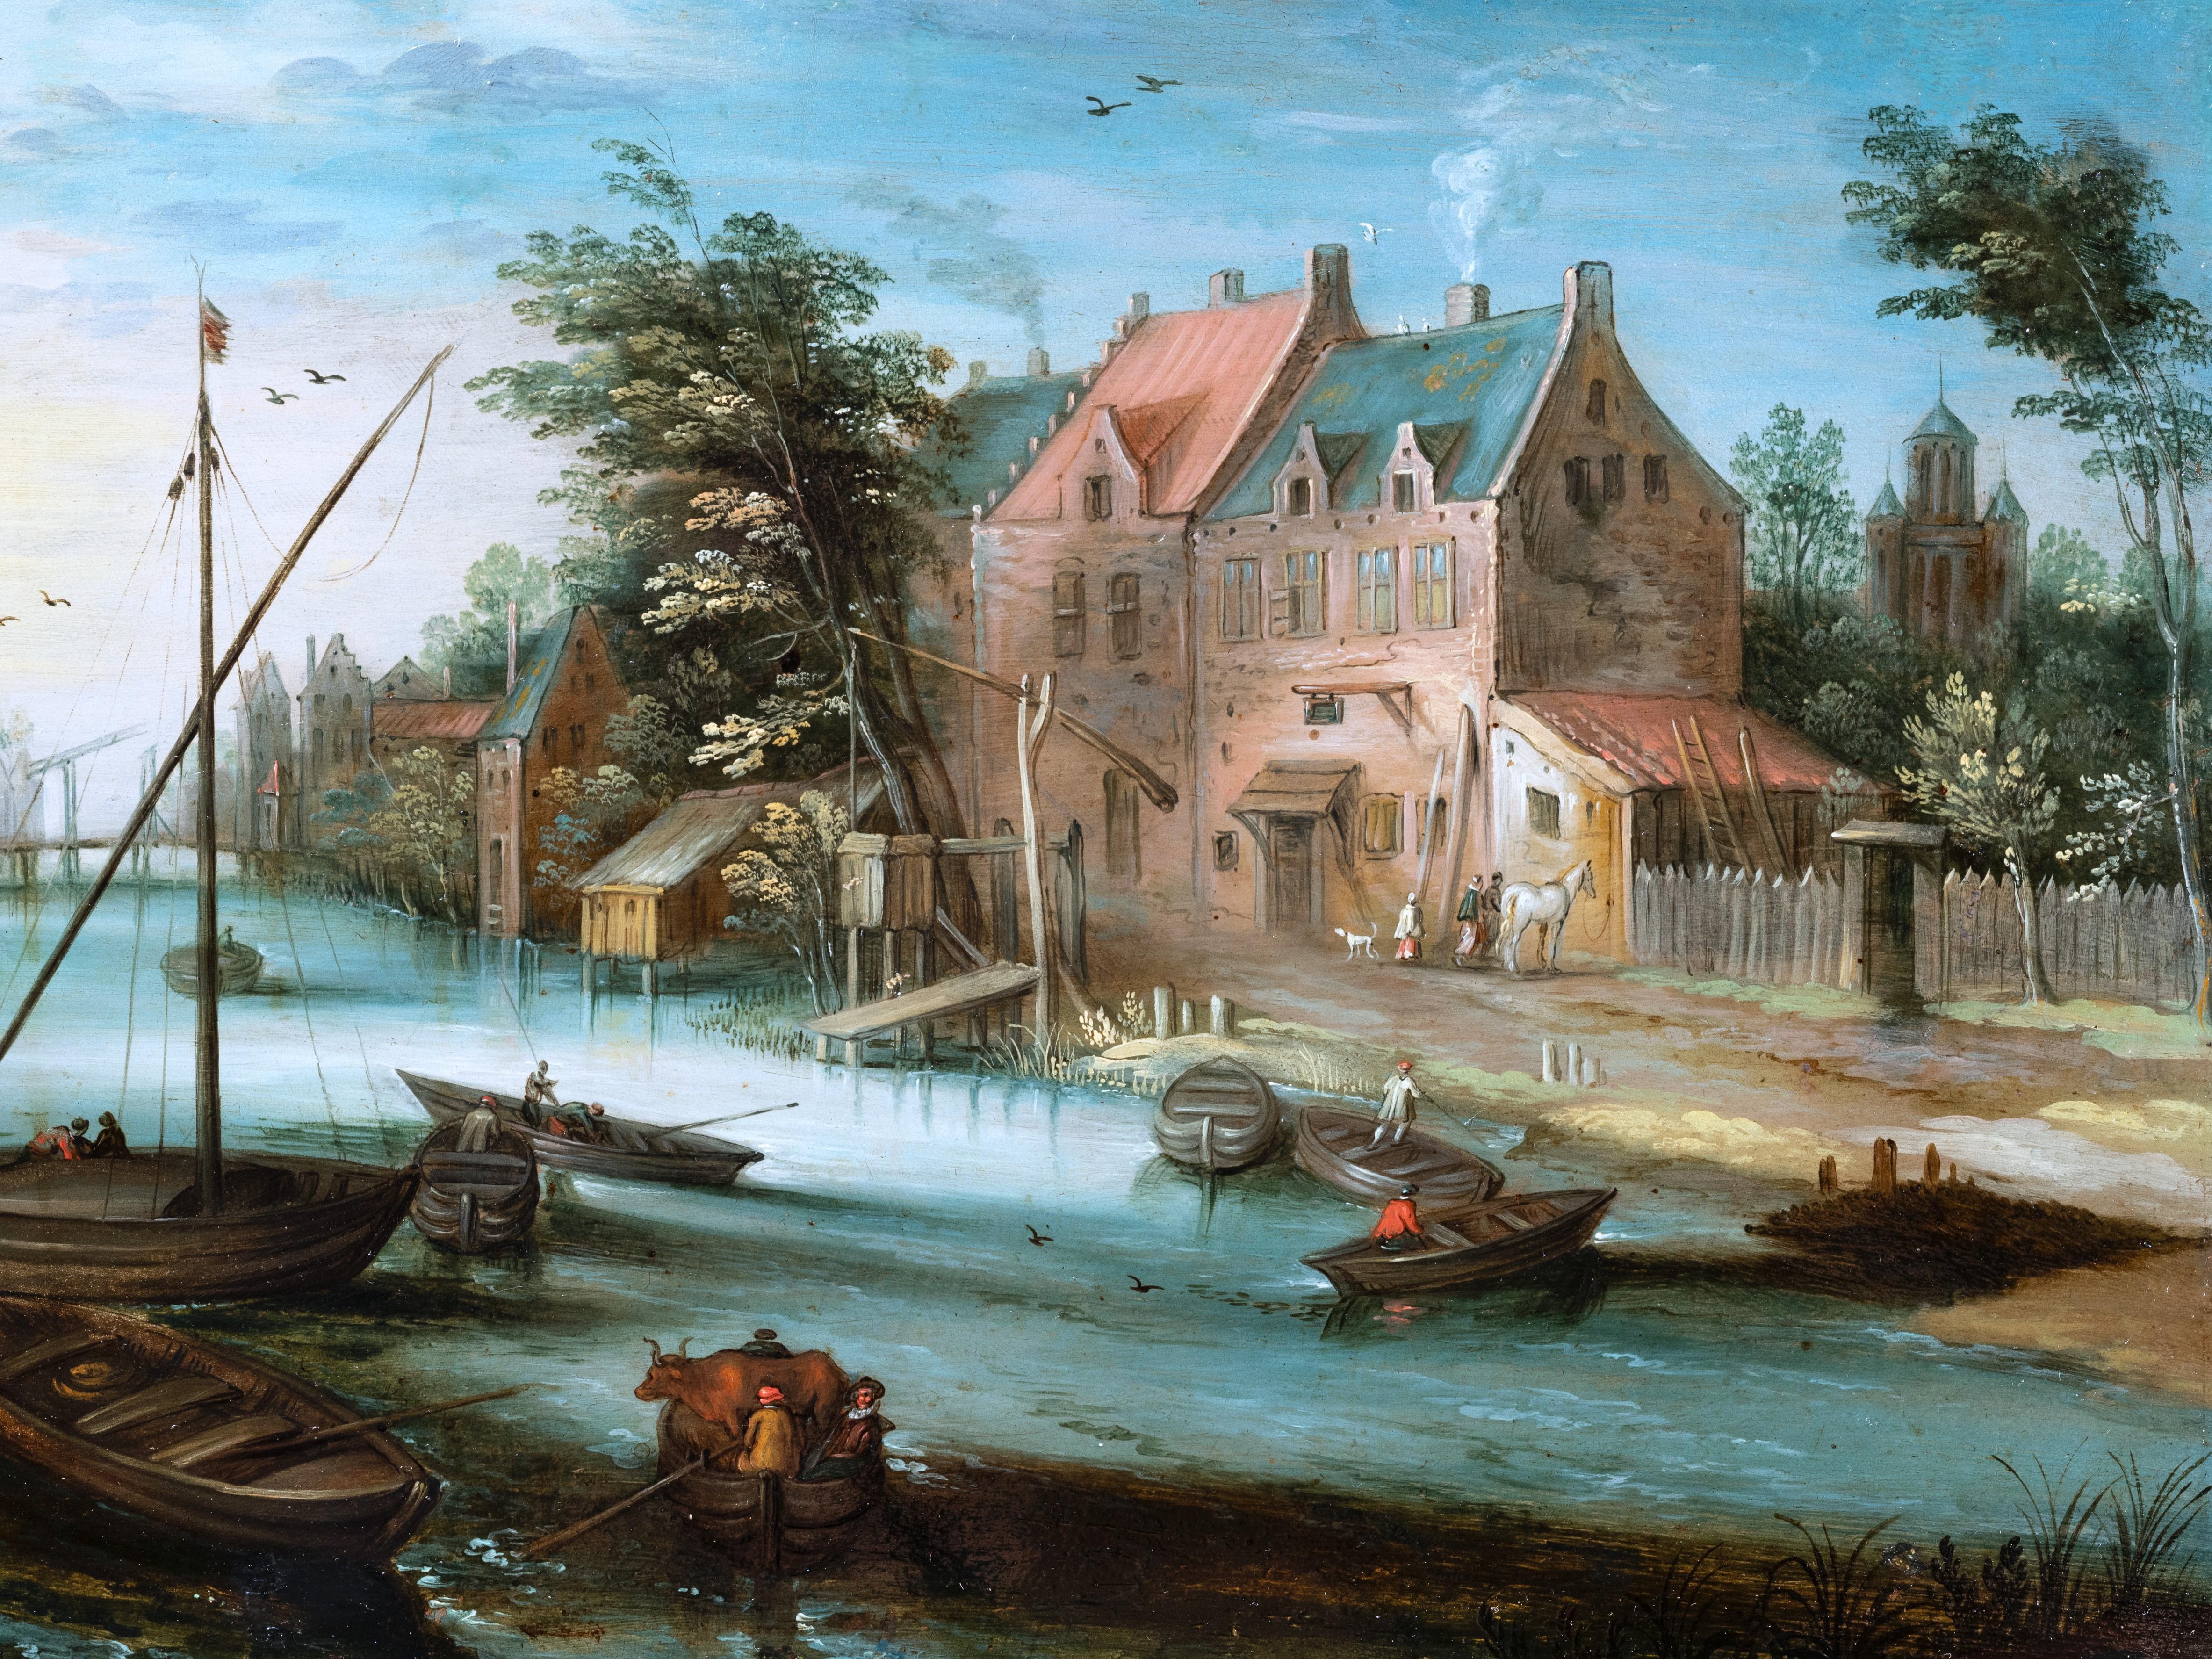 River landscape
Studio of Jan Brueghel the Younger (1601-1678)
17th century Antwerp school
Oil on copper: h. 7.48 in, w. 10.43 in
Ebonized wood and moulded frame
Framed: h. 18.4 in, w. 20.87 in.

This precious painting illustrates the view of a